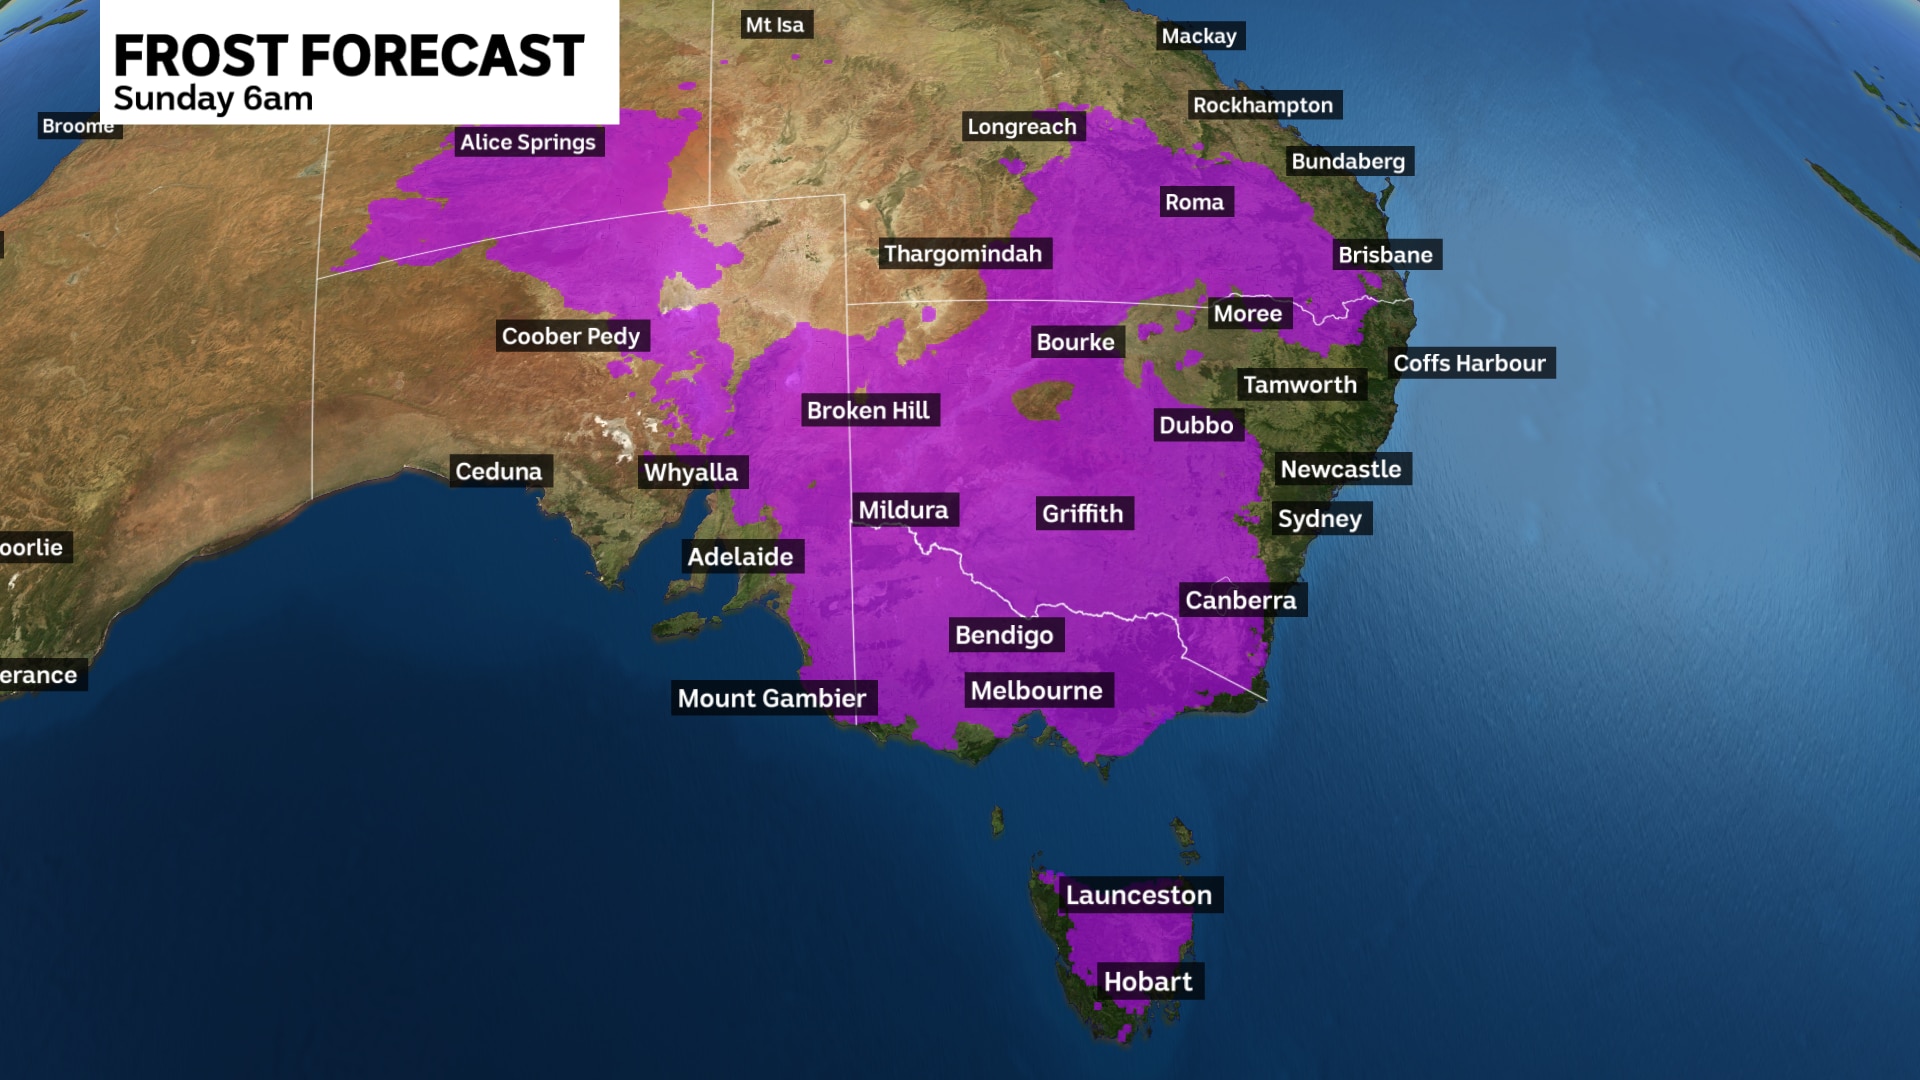 a weather map showing the south east parts of new south wales expected to get frost on sunday